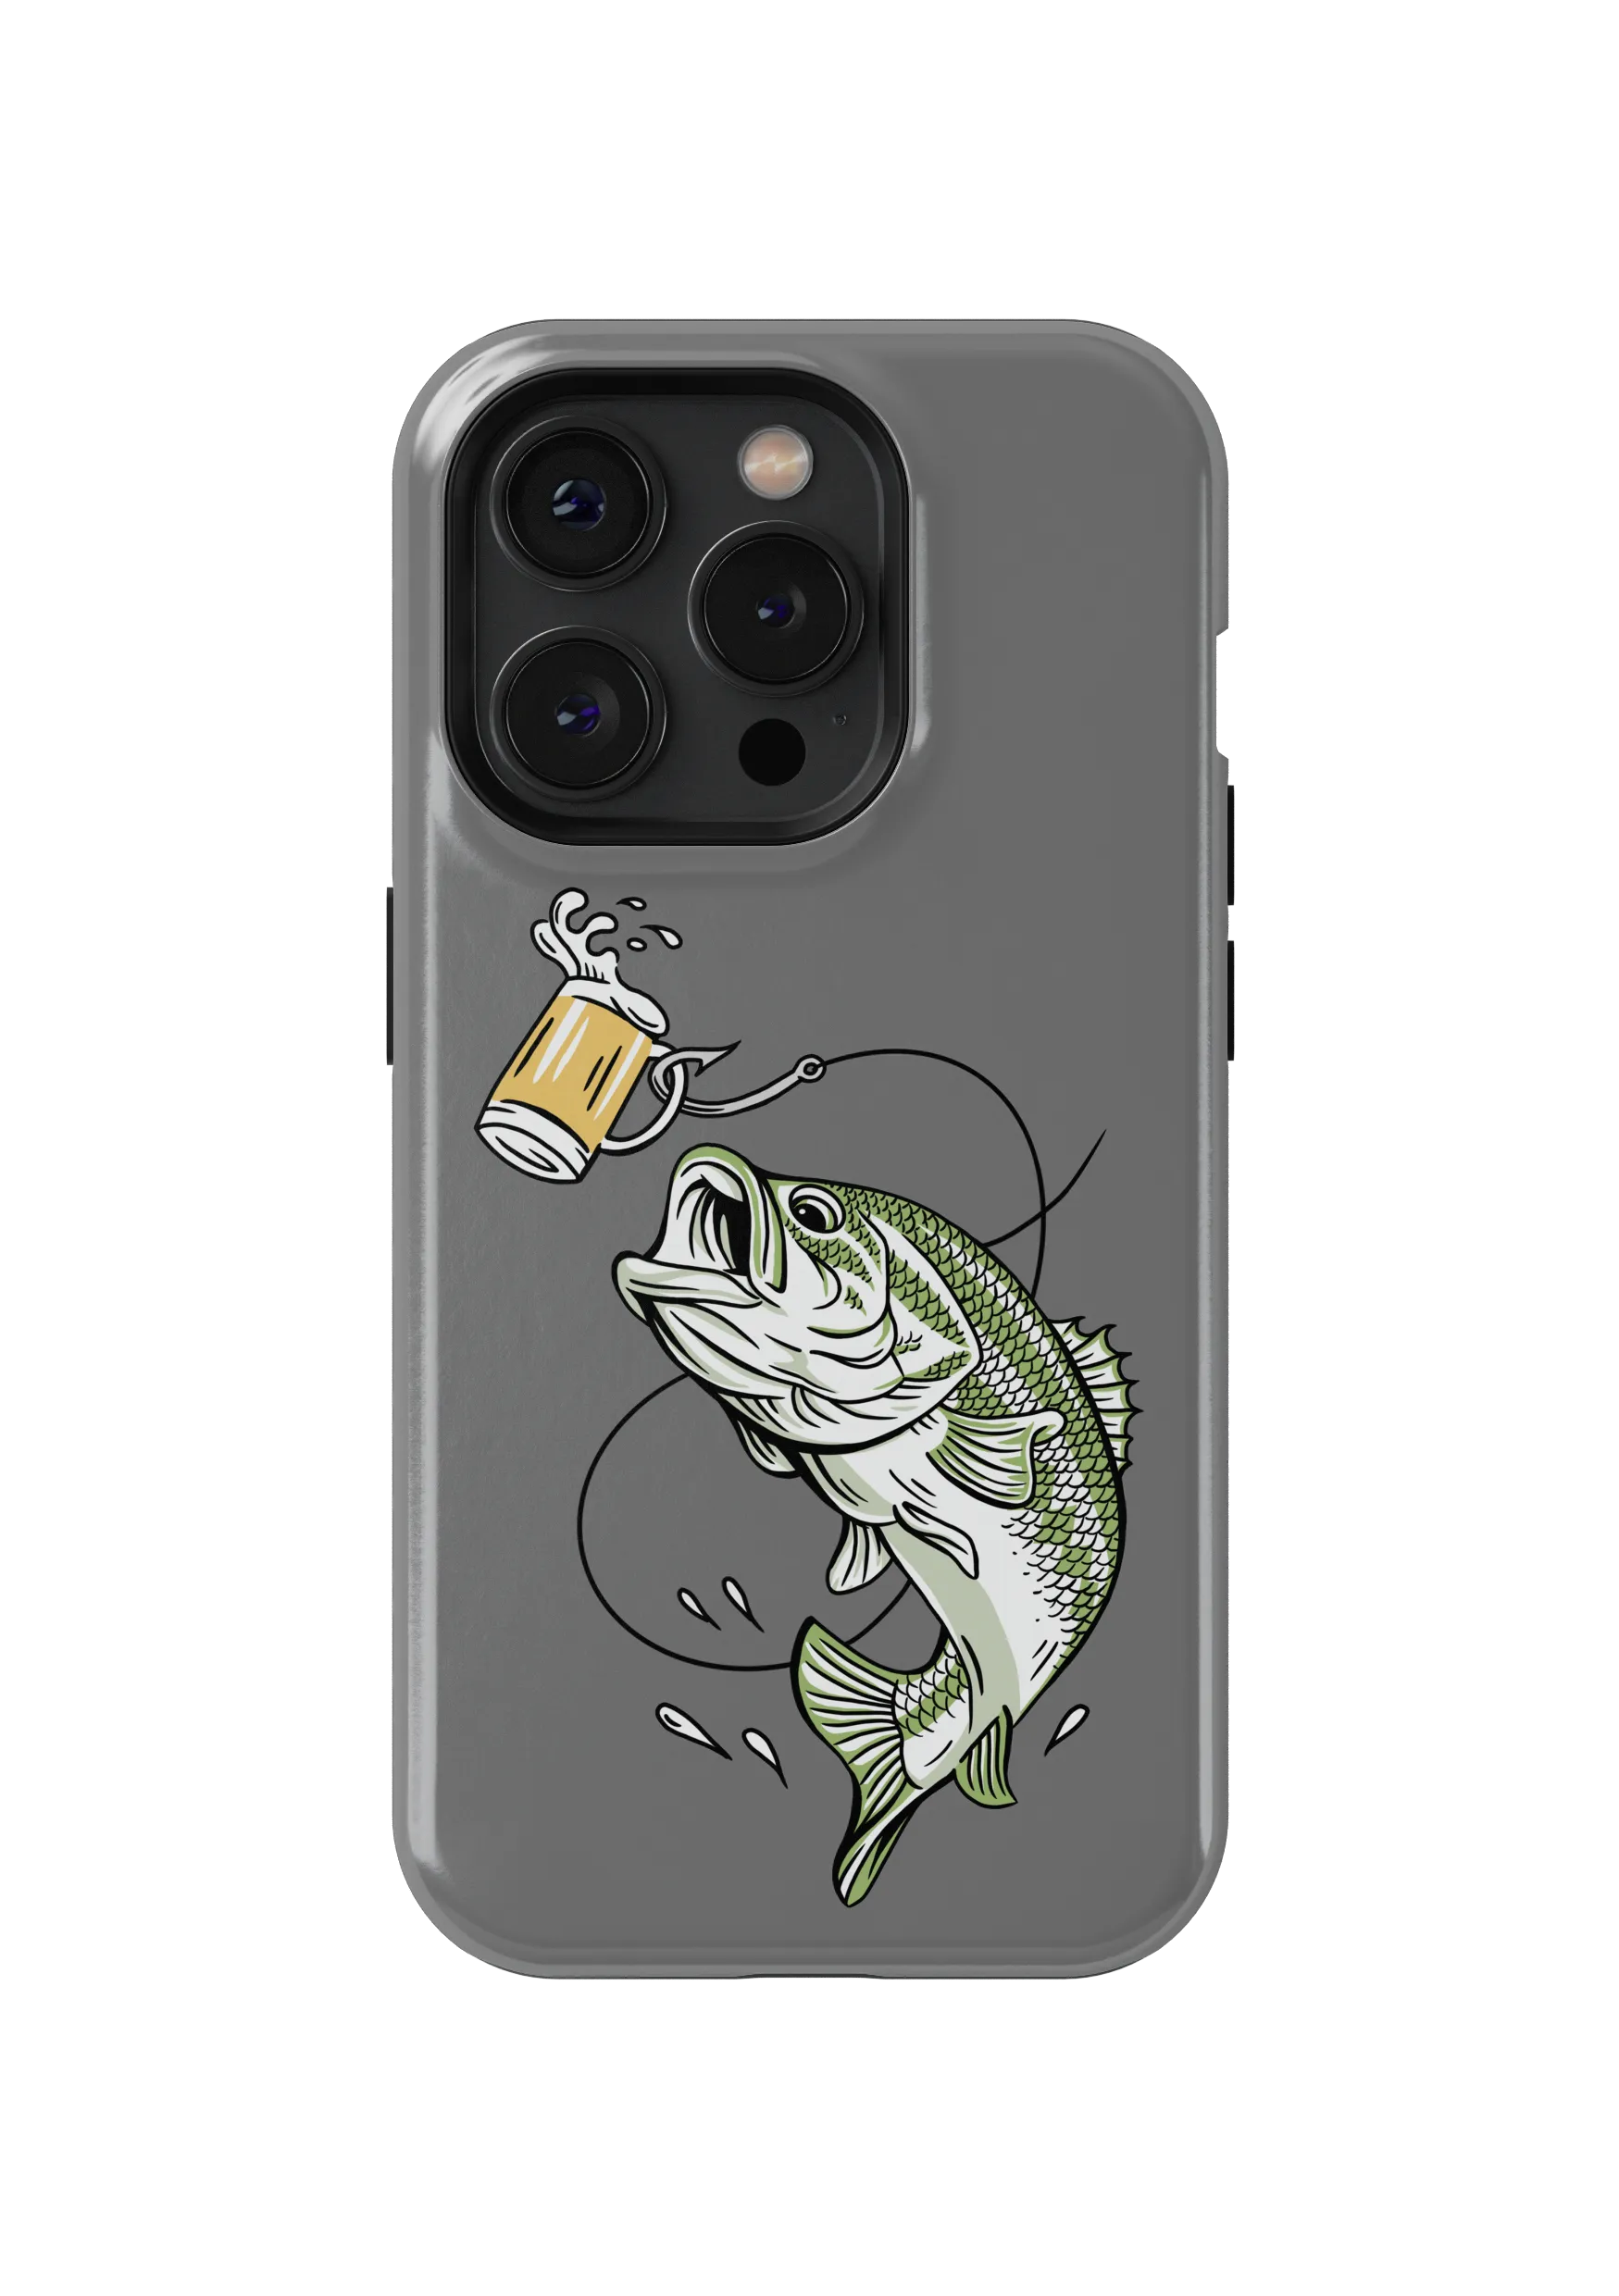 Lager Lure Bass Beer” graphic phone case by Habby Art.